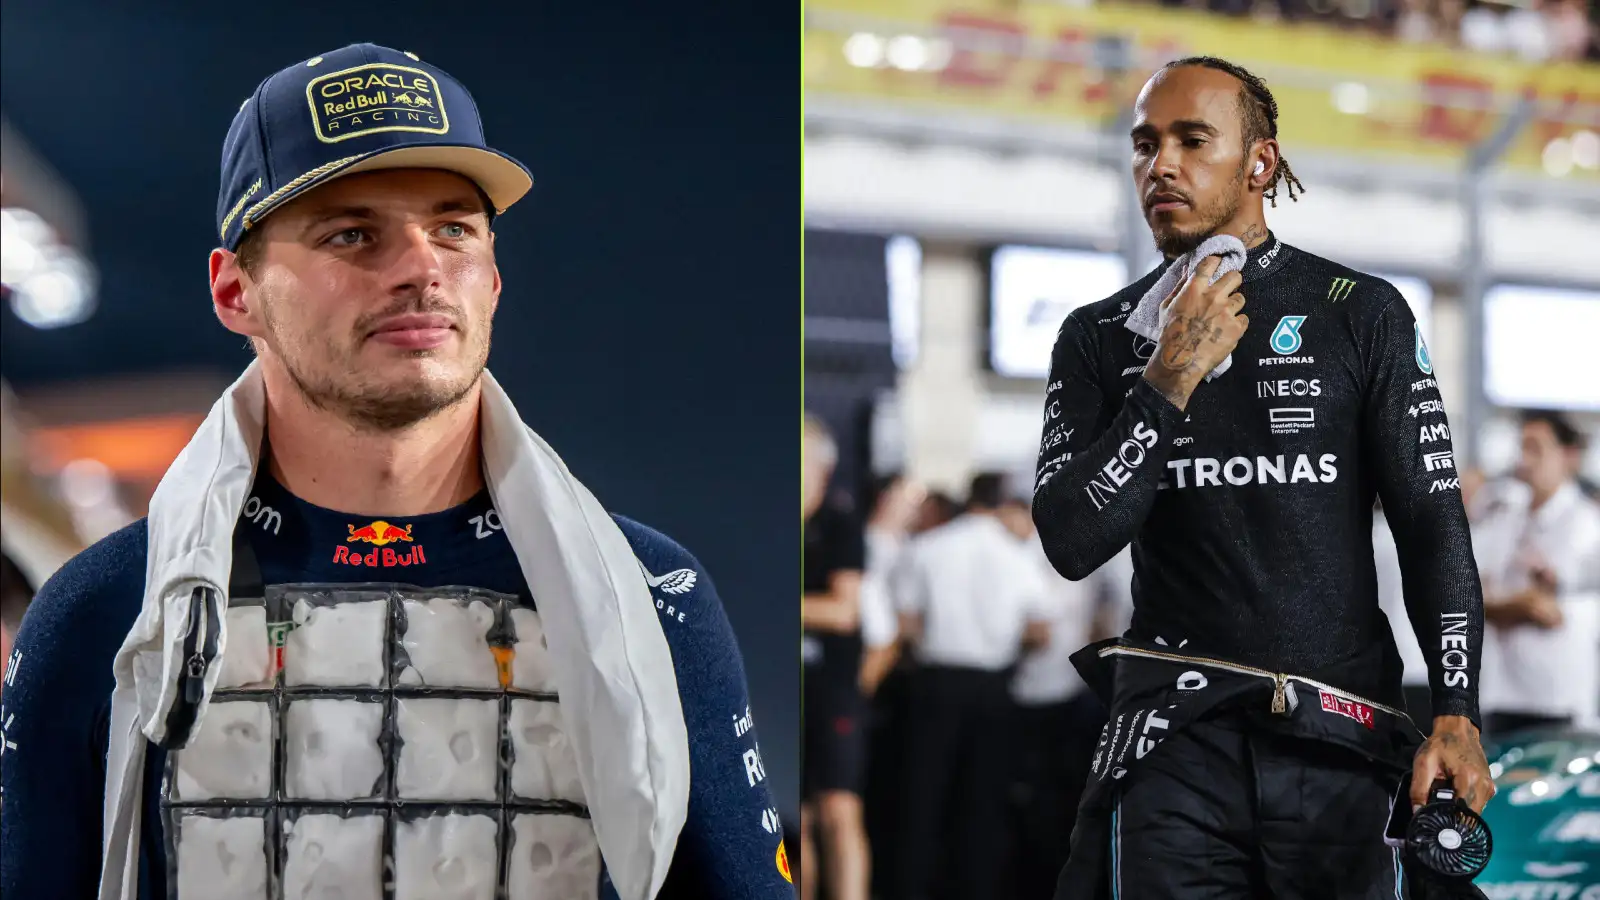 A smiling Max Verstappen walks down the pitlane, while Lewis Hamiltoon stays cool and dry at the Qatar Grand Prix.